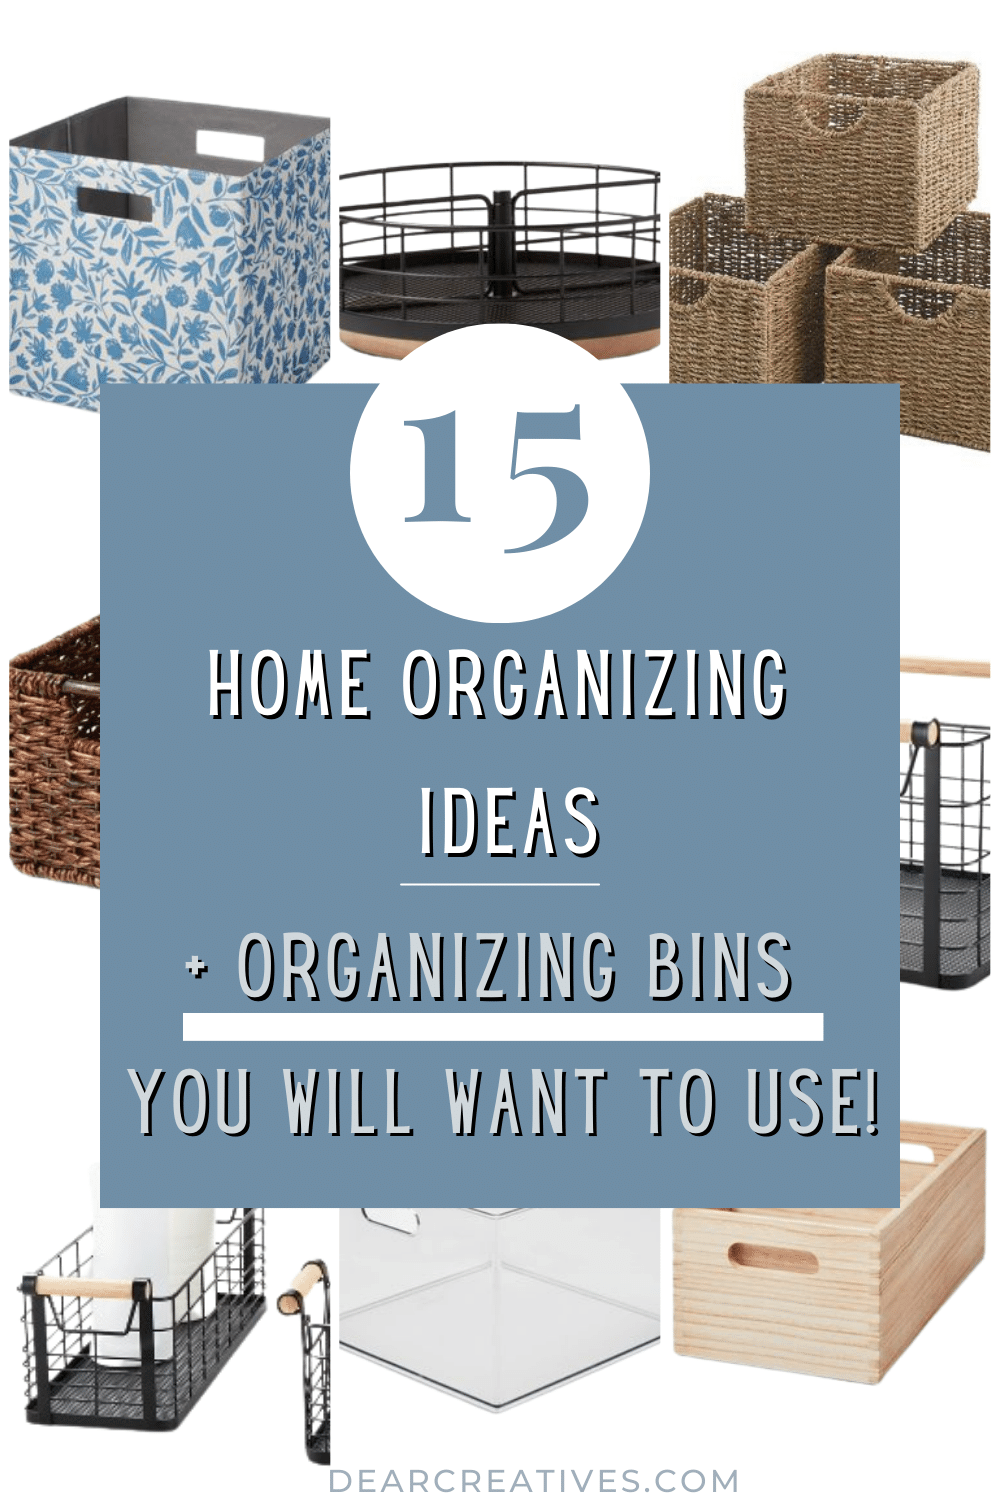 Organizing Bins To Get Your Home Organized!